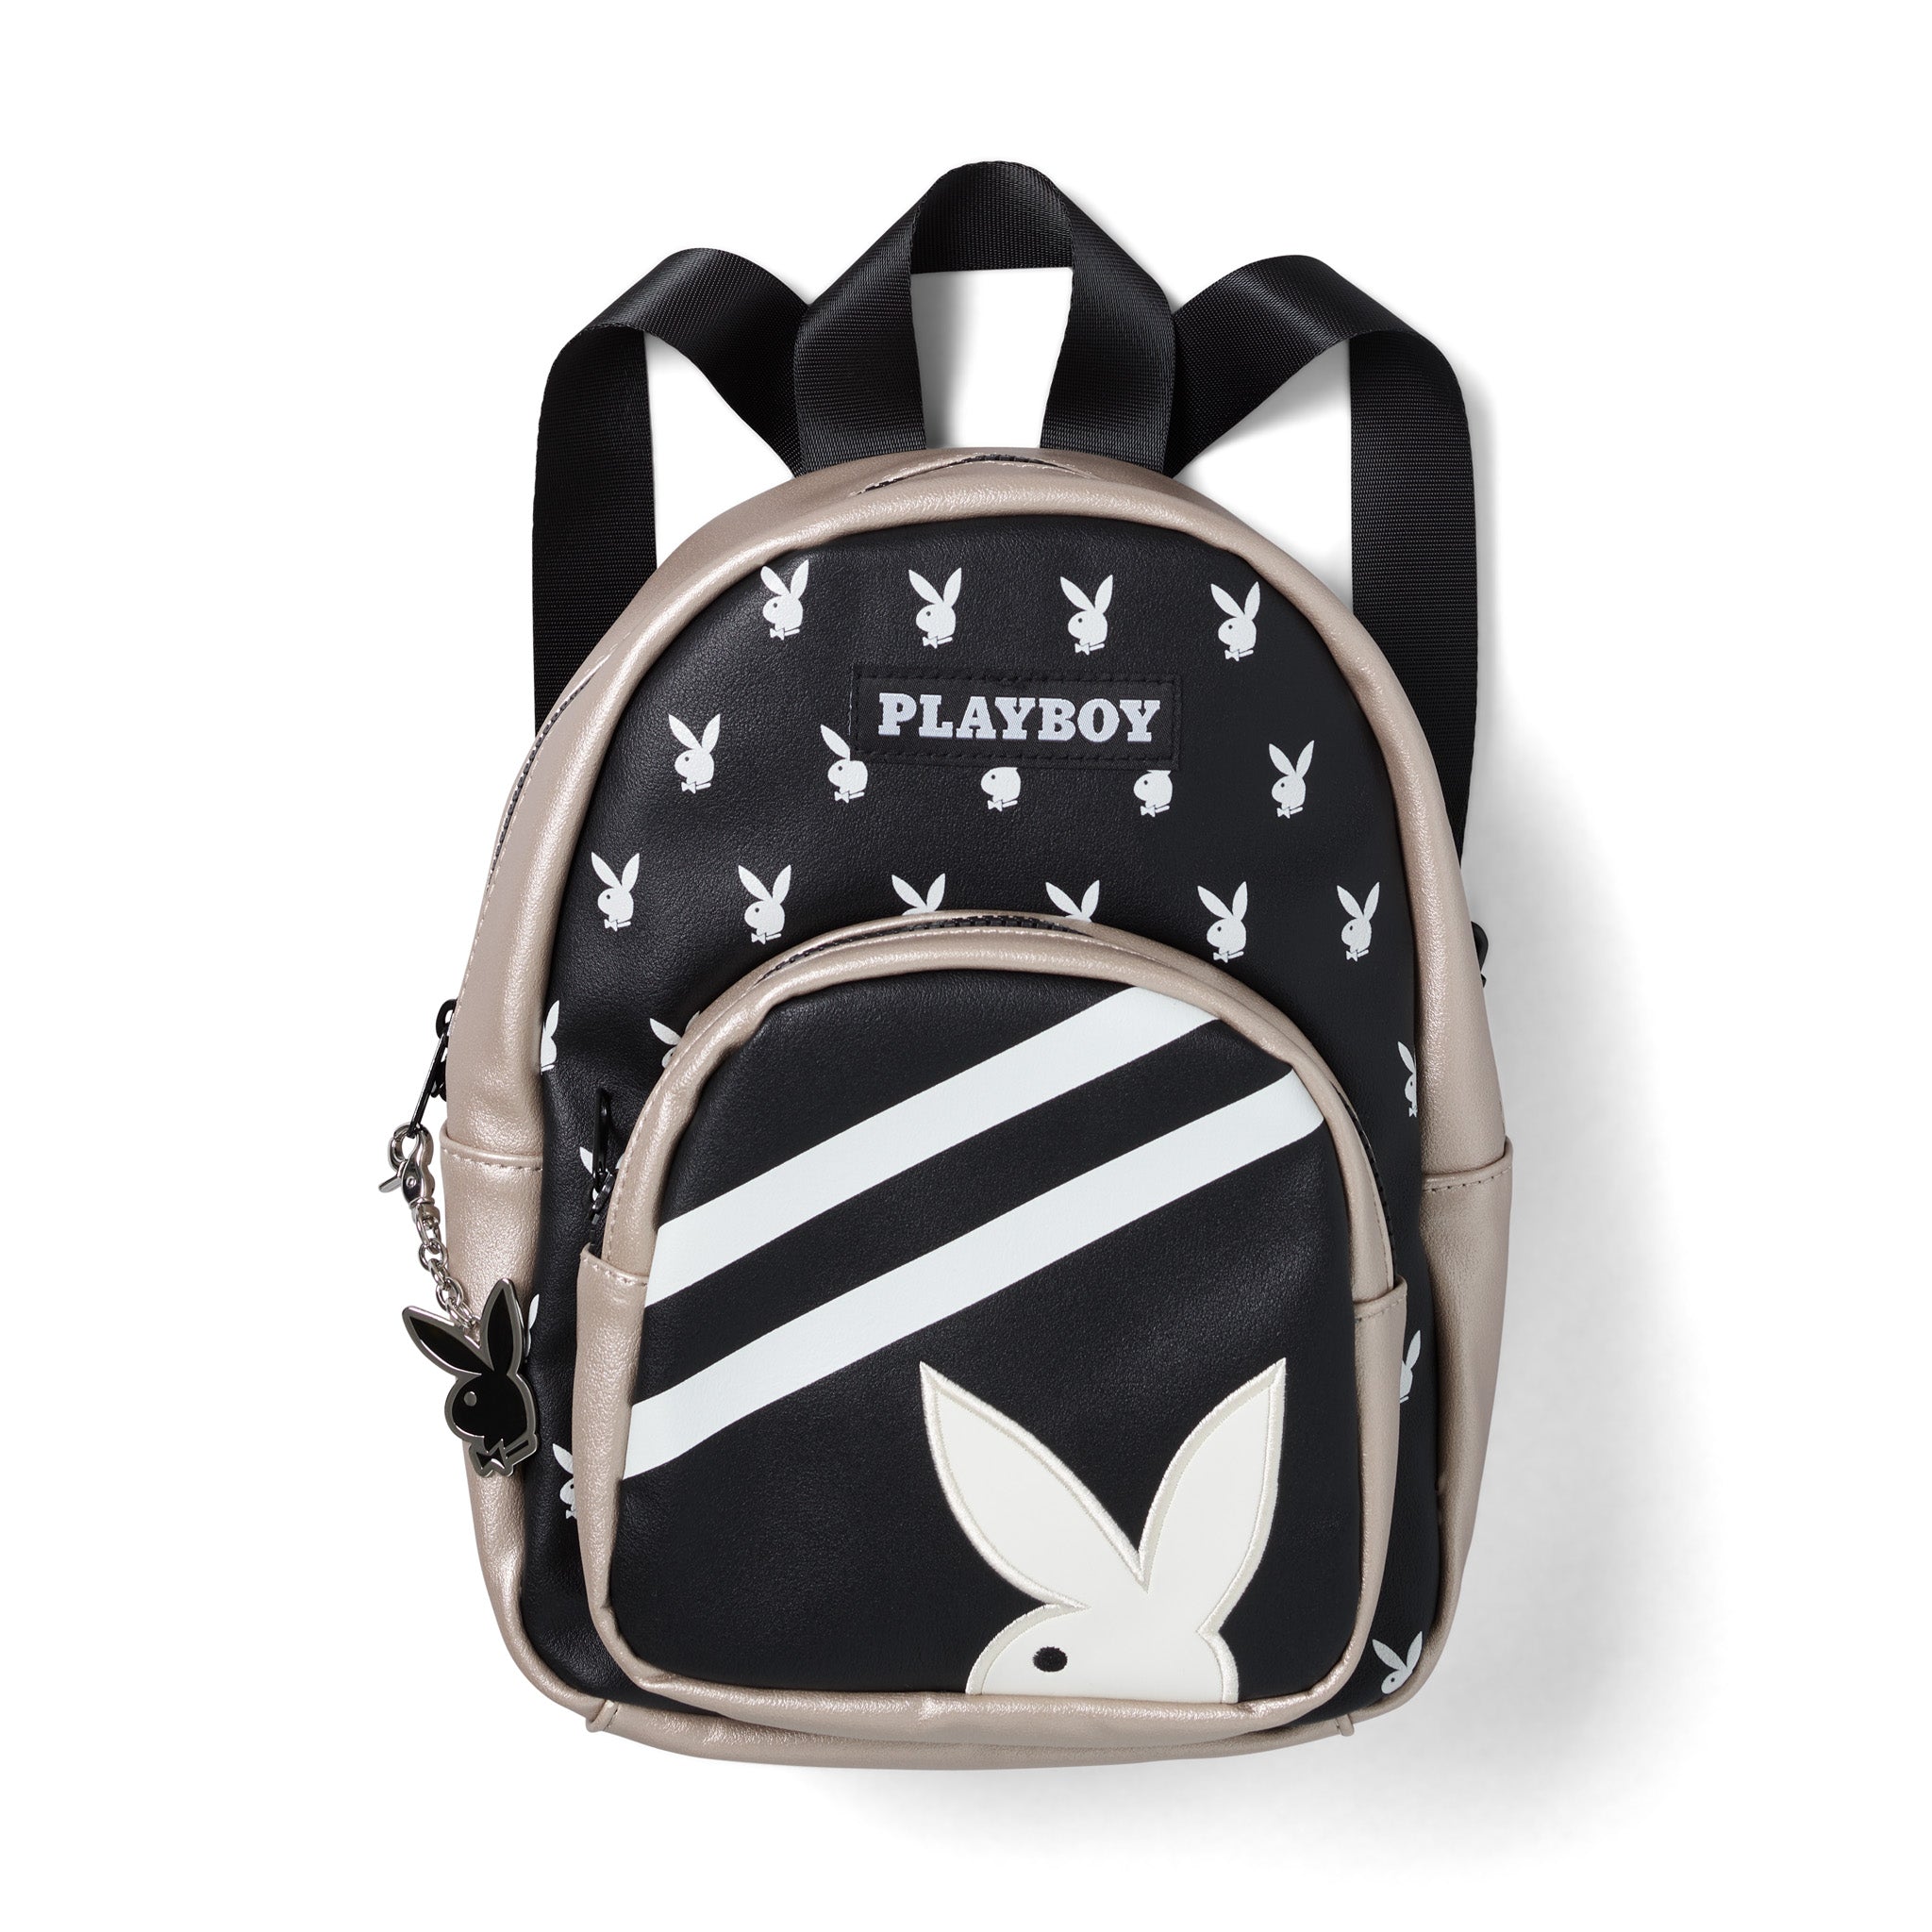 Unisex Bags and Women's Clutches | Official Playboy Accessories